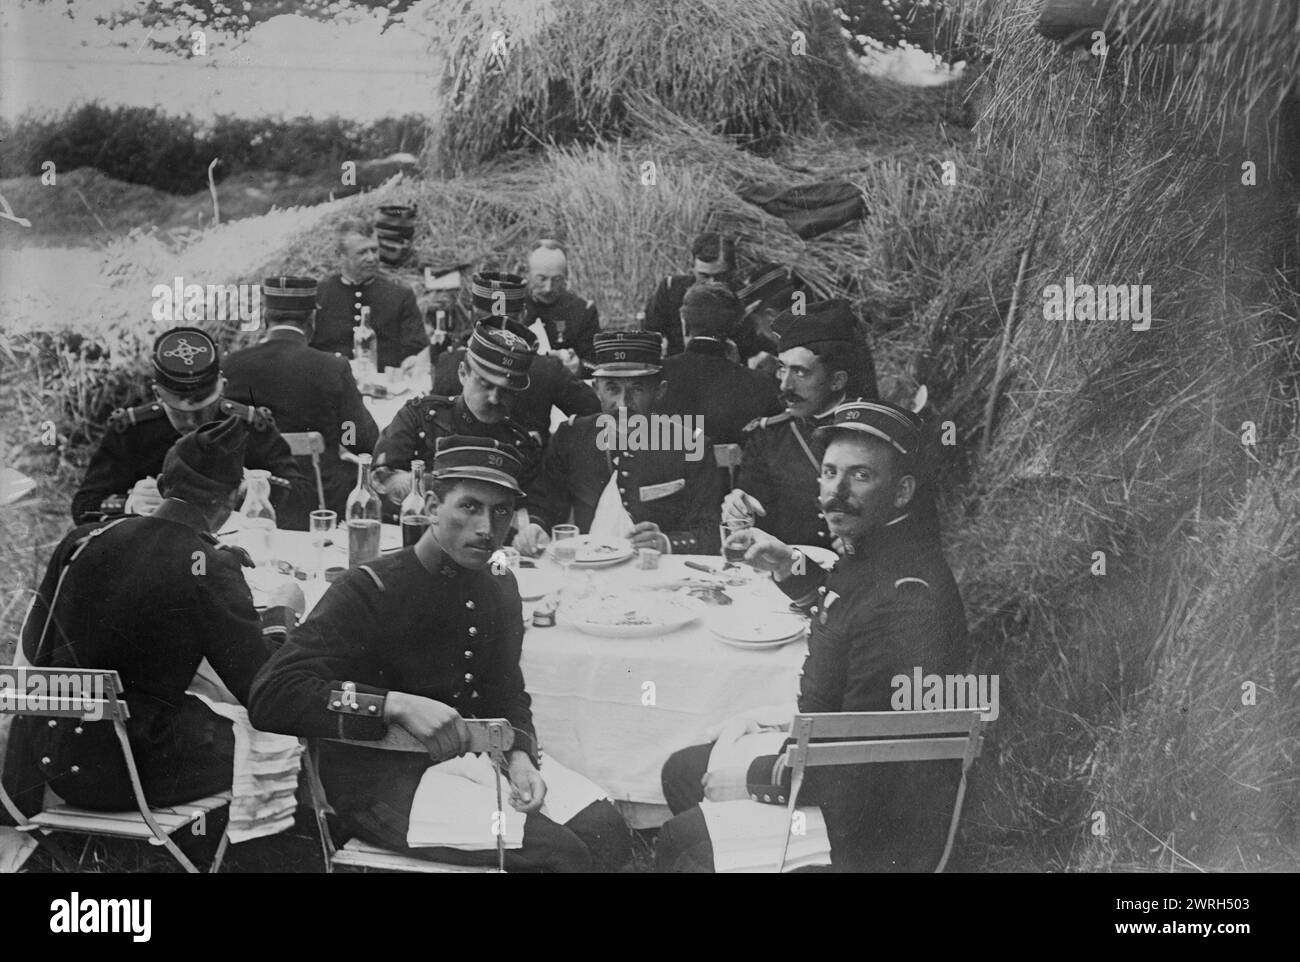 French Officers dining, between c1914 and c1915. French officers eating outdoors near a haystack during World War I. Stock Photo